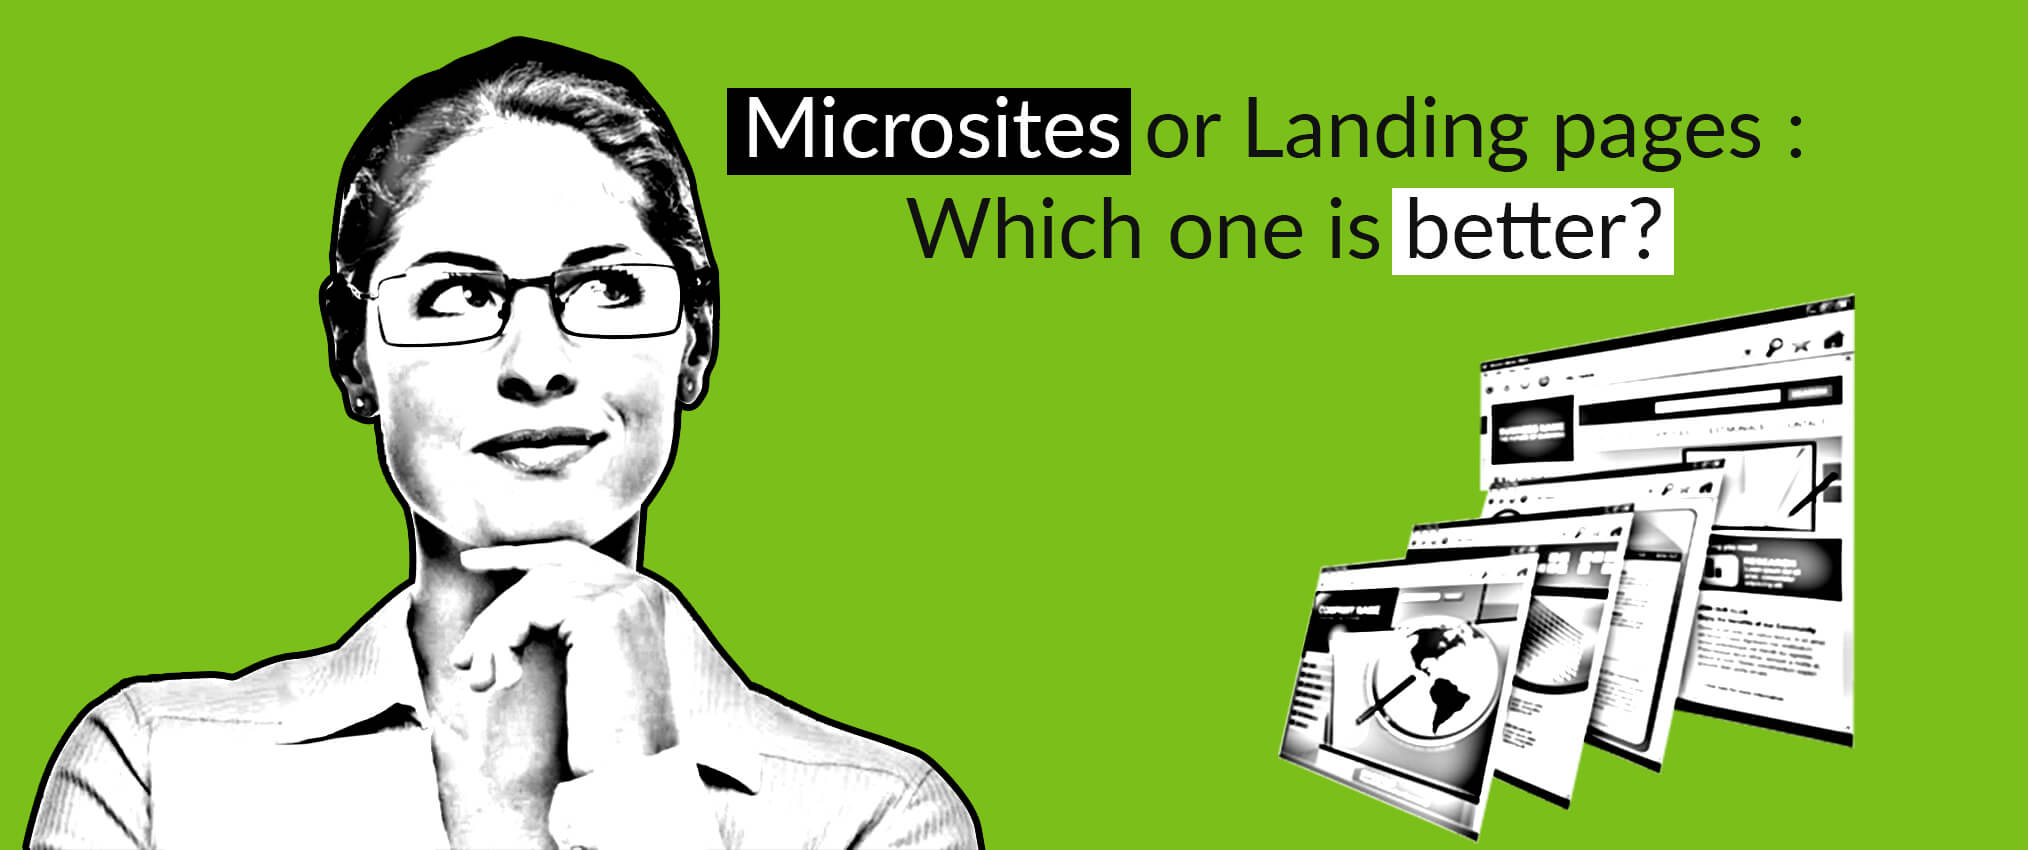 Microsites or Landing pages